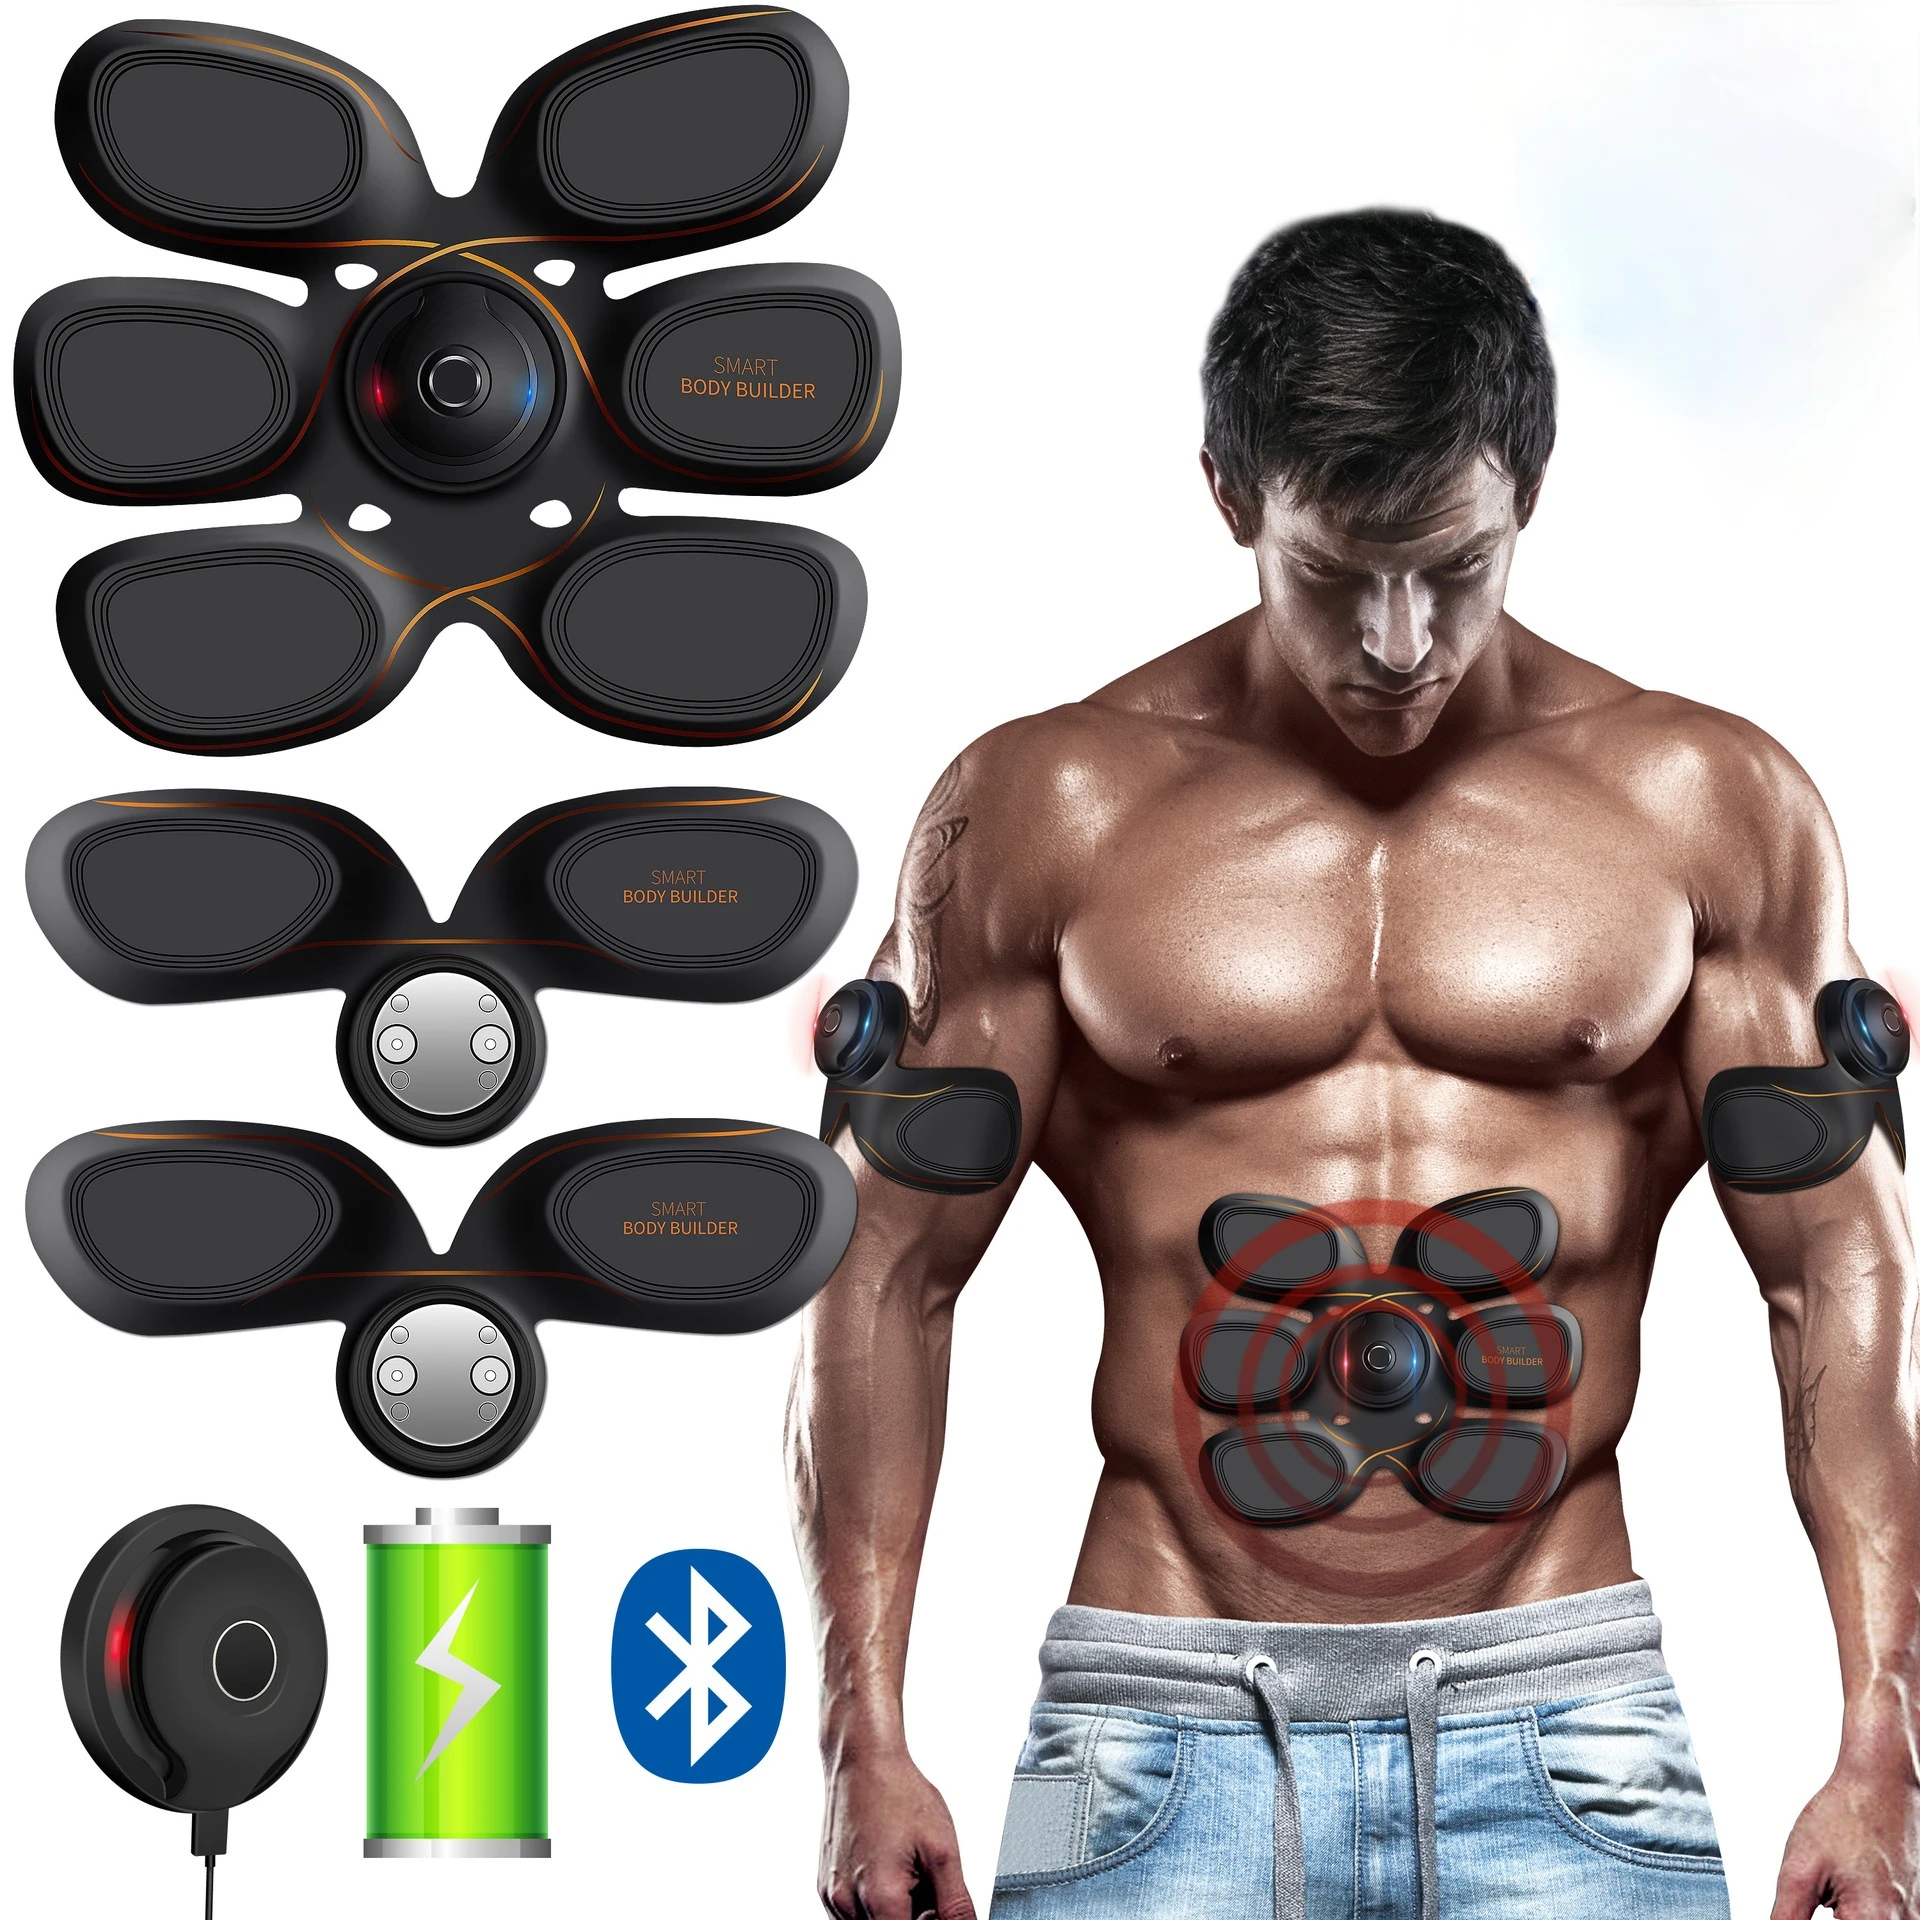 EMS Smart Fitness Abdominal Muscle Stimulator Newest Mobile Phone Application Control Home Gym Office Fitness Equipment 2022 newest android 9 0 full hd 1080p 4k 450 ansi lumens projecteur video home theater mini projector mobile phone